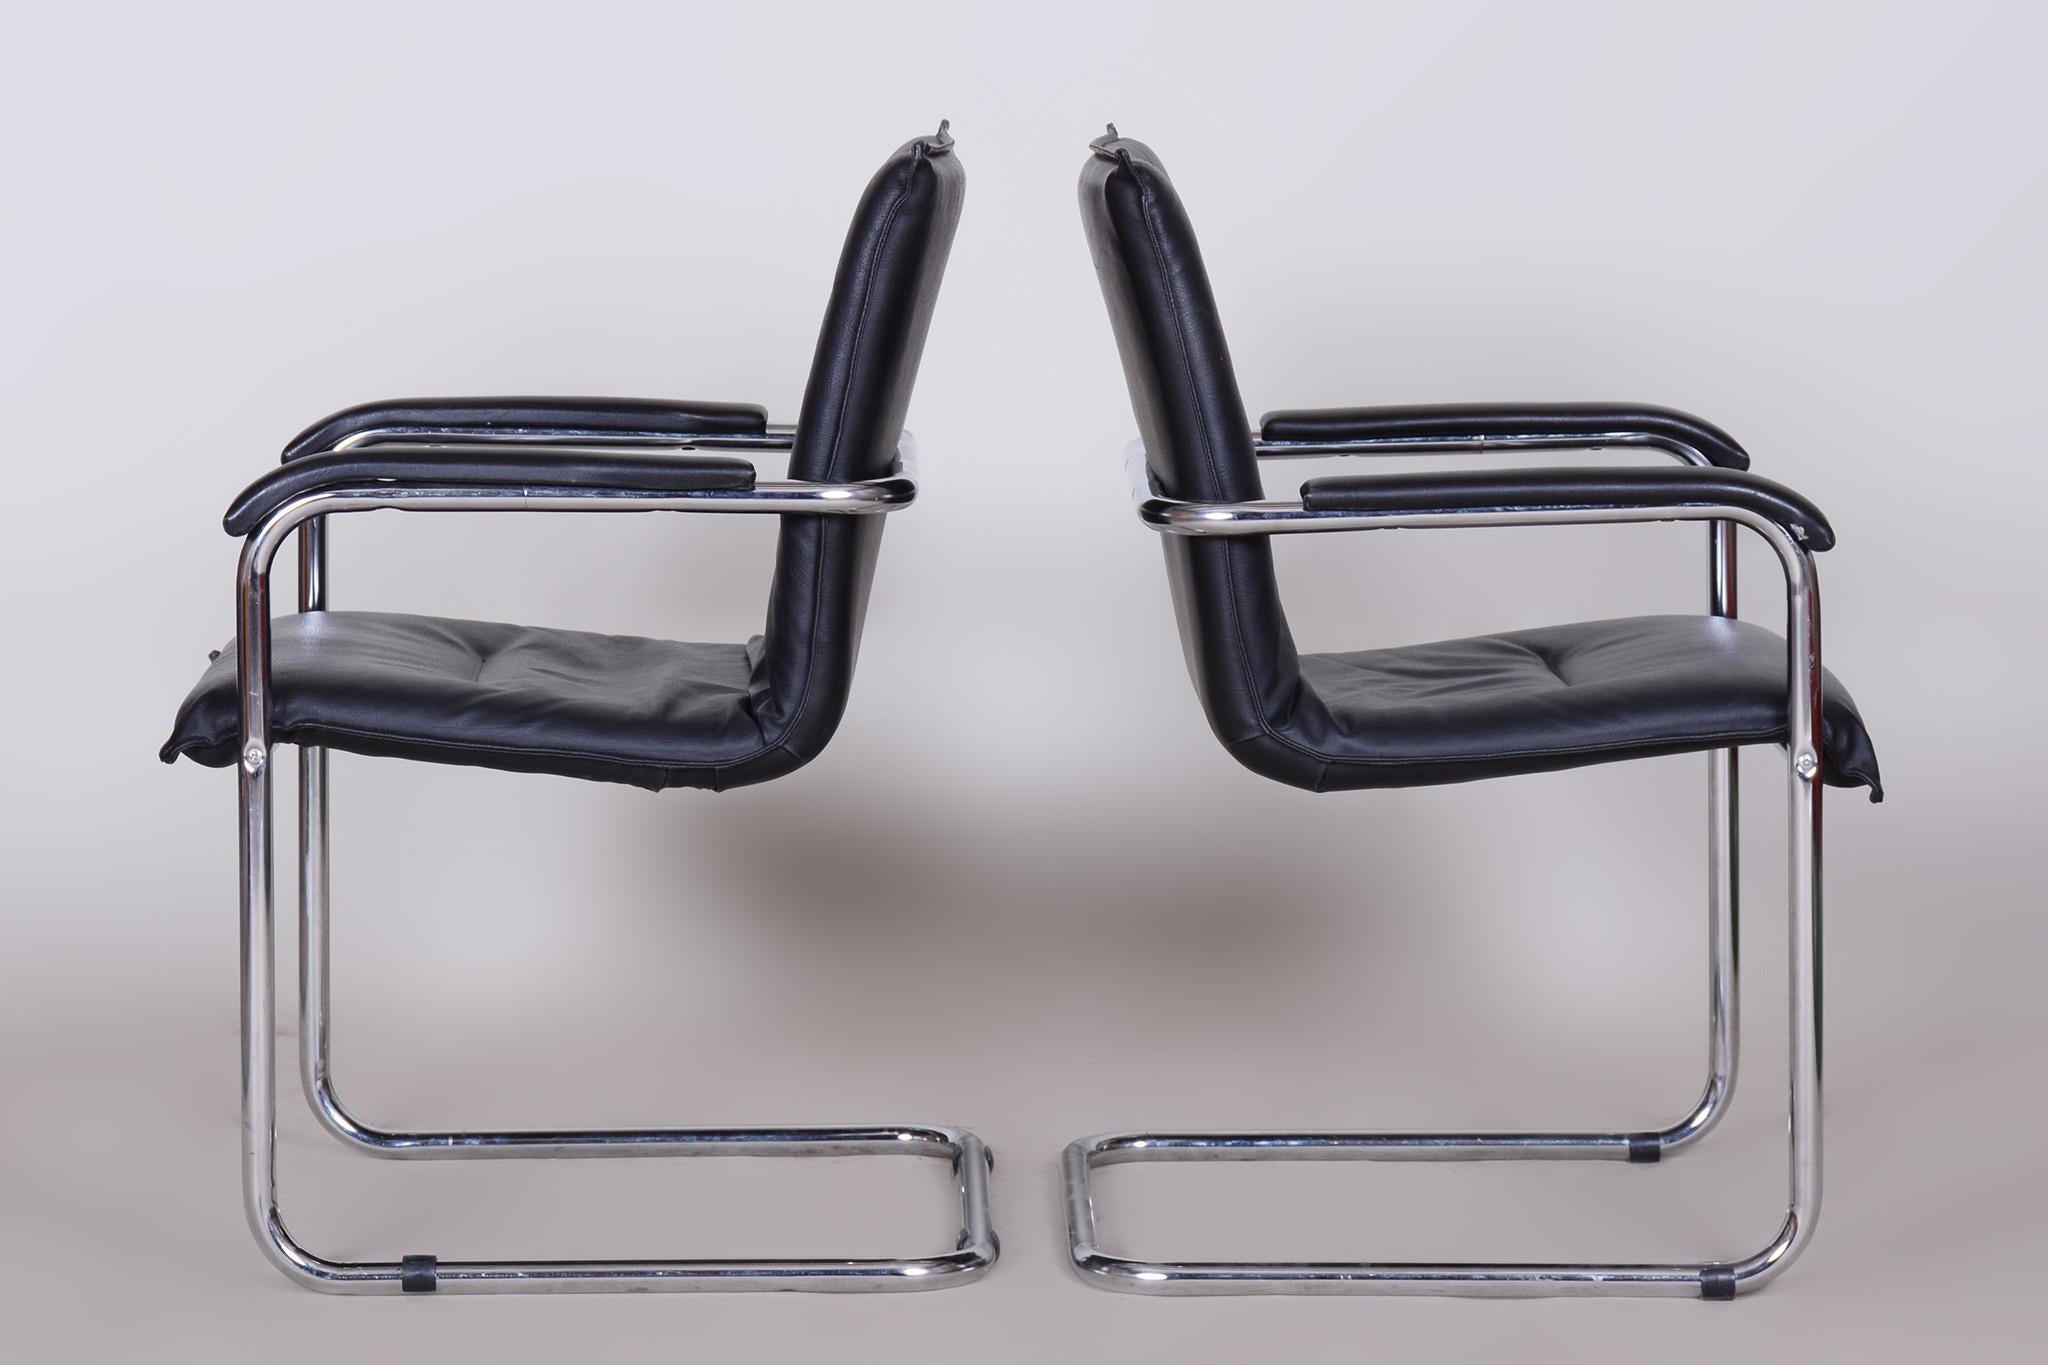 Pair of Black Bauhaus Chairs, Artificial Leather, 1970s, Germany For Sale 2